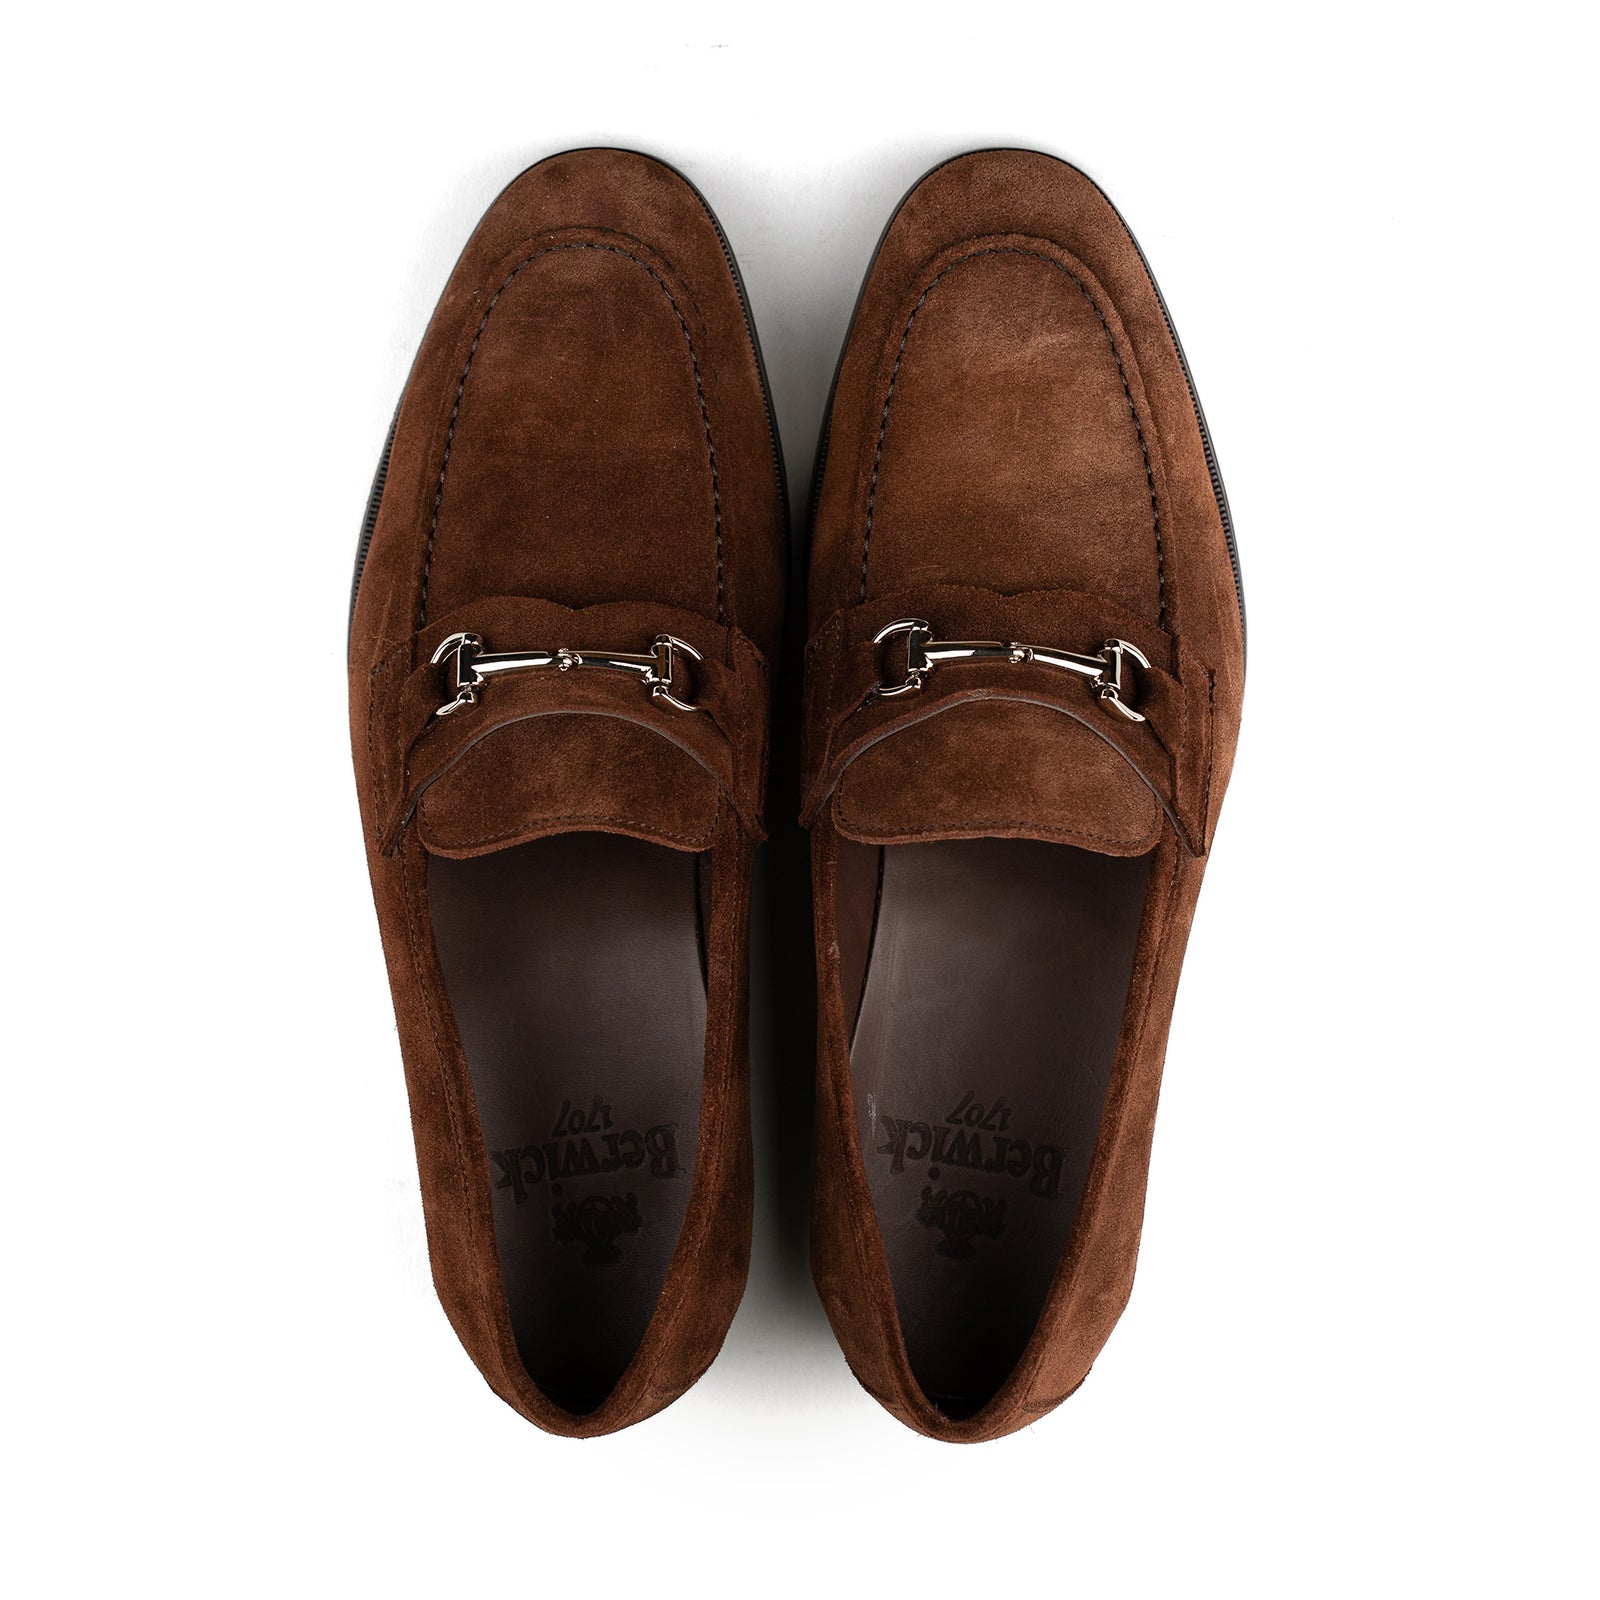 Blake Bit Loafer - Polo Brown Suede